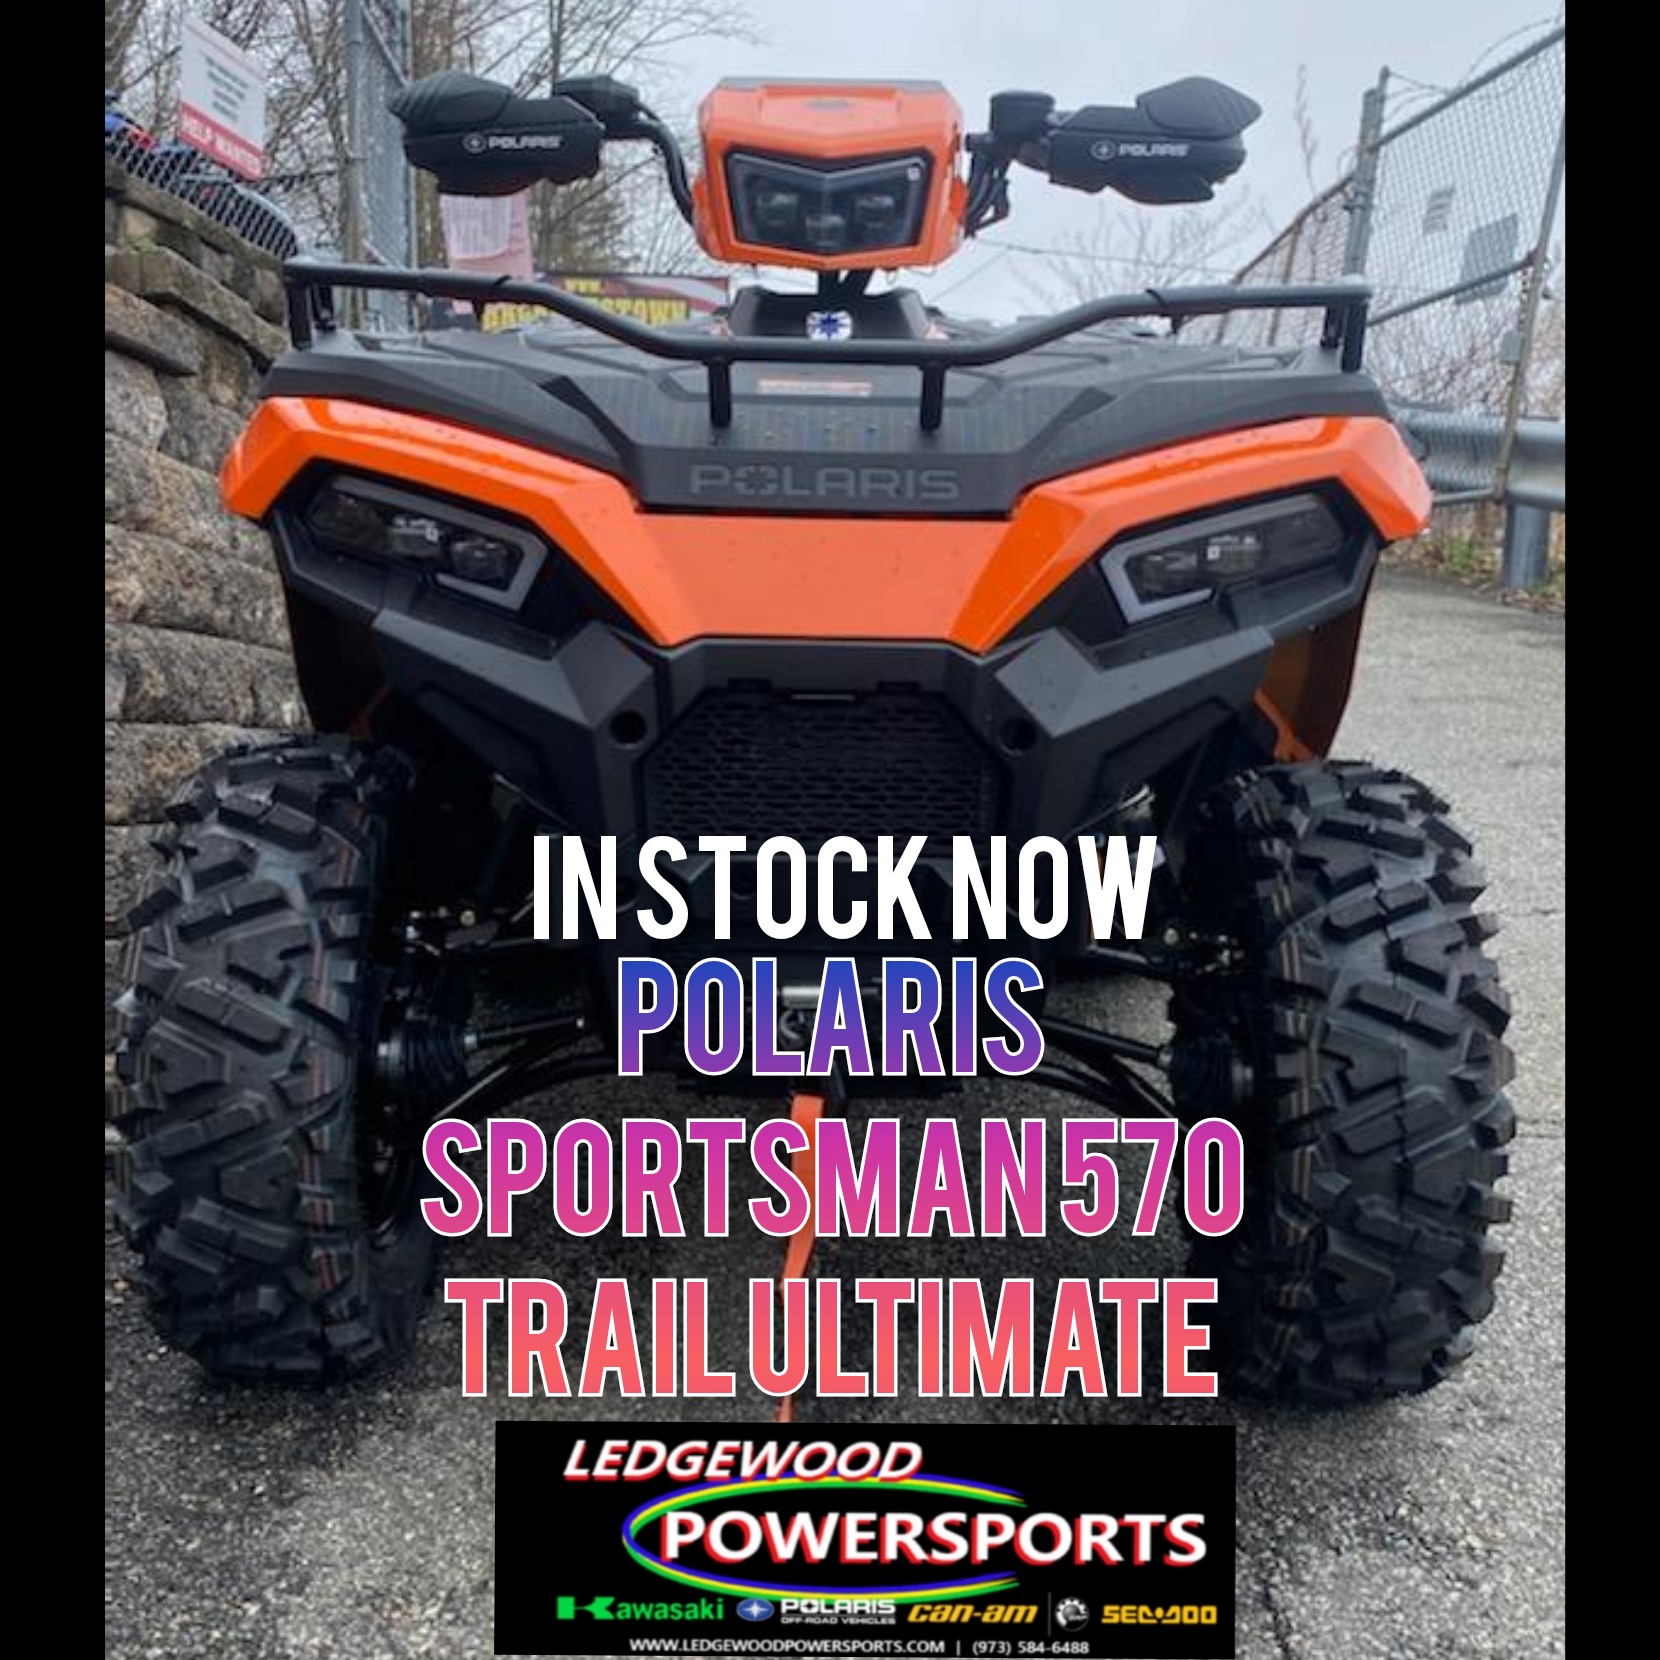 2022 Polaris Sportsman 570 Ultimate Trail Limited Edition in Ledgewood, New Jersey - Photo 2